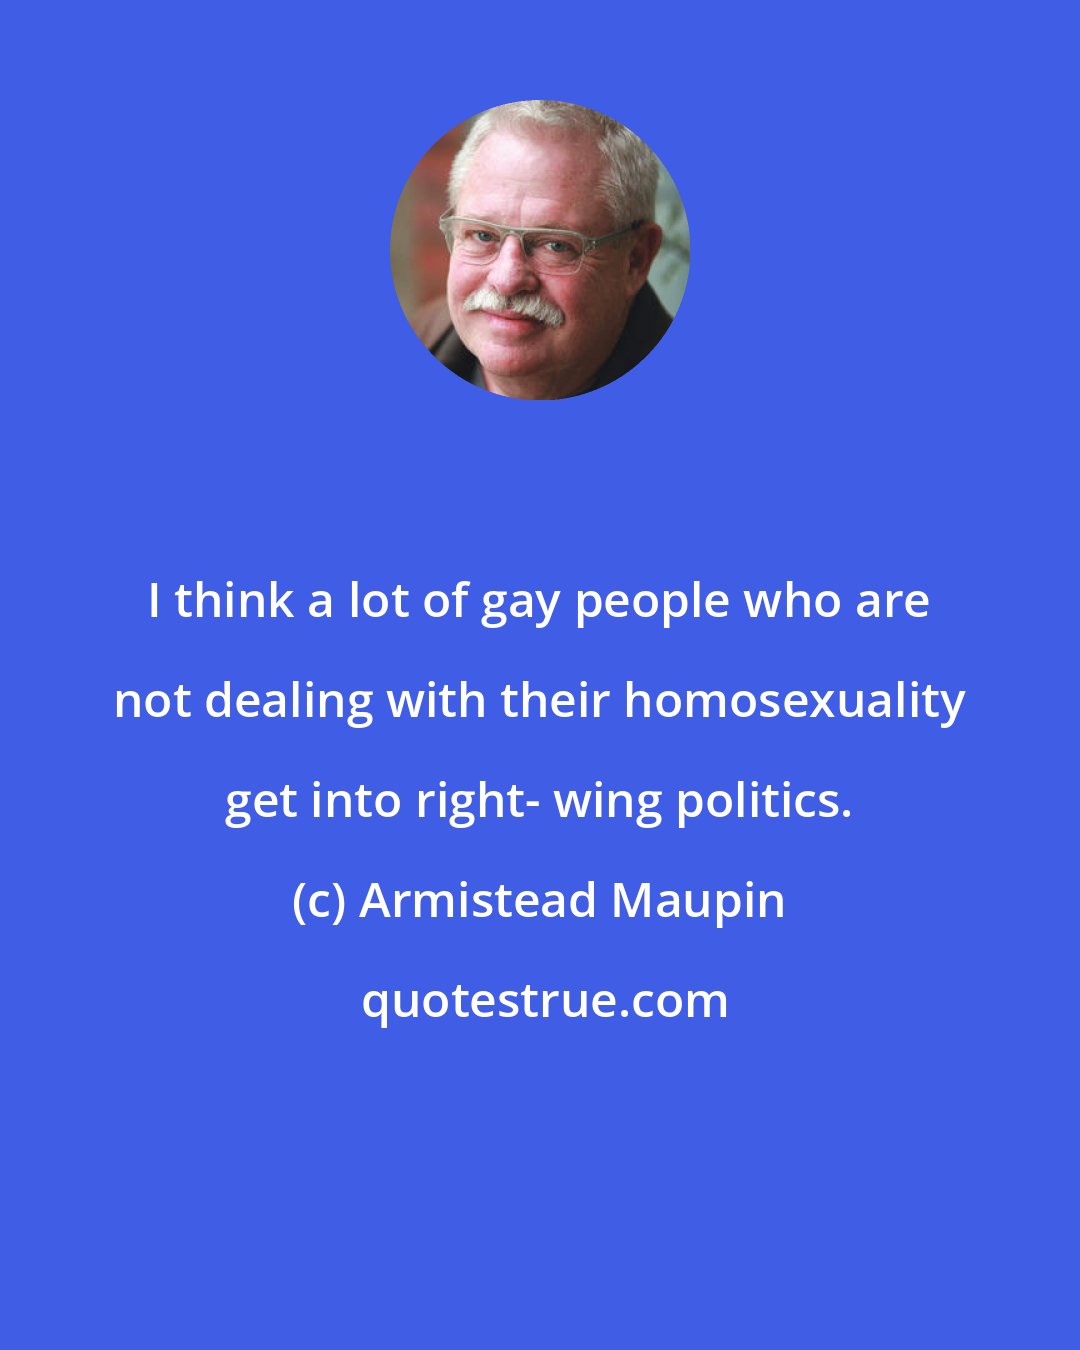 Armistead Maupin: I think a lot of gay people who are not dealing with their homosexuality get into right- wing politics.